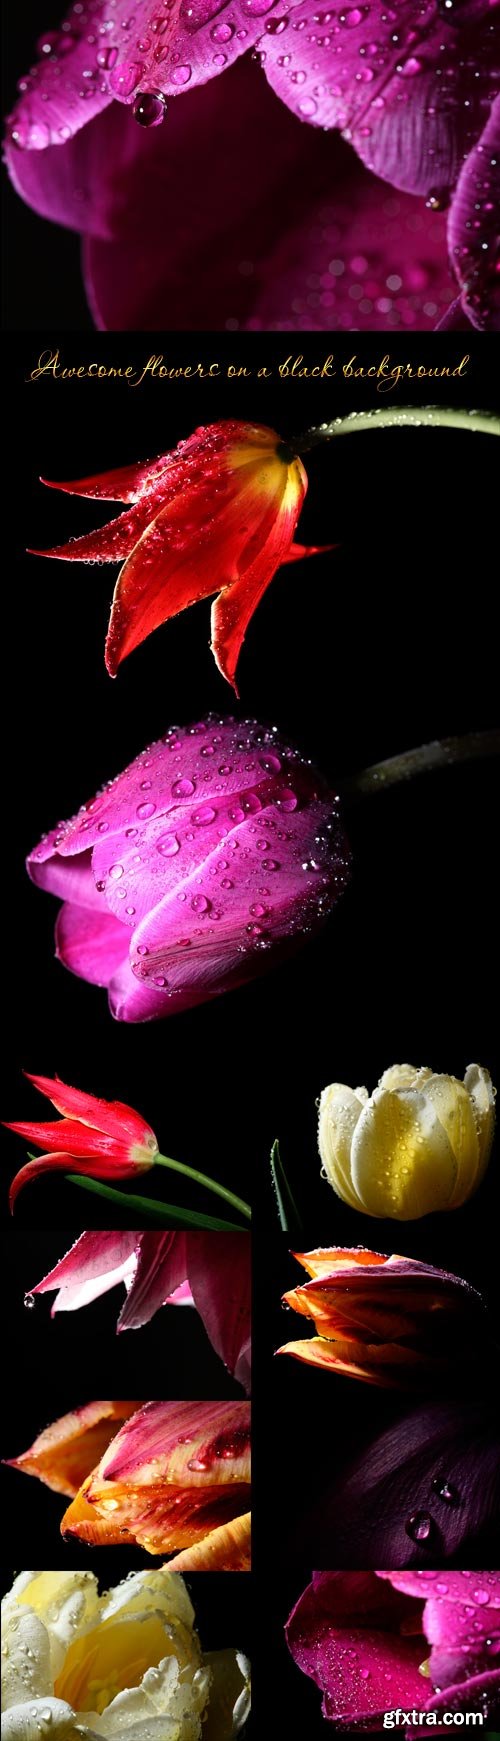 Awesome flowers on a black background